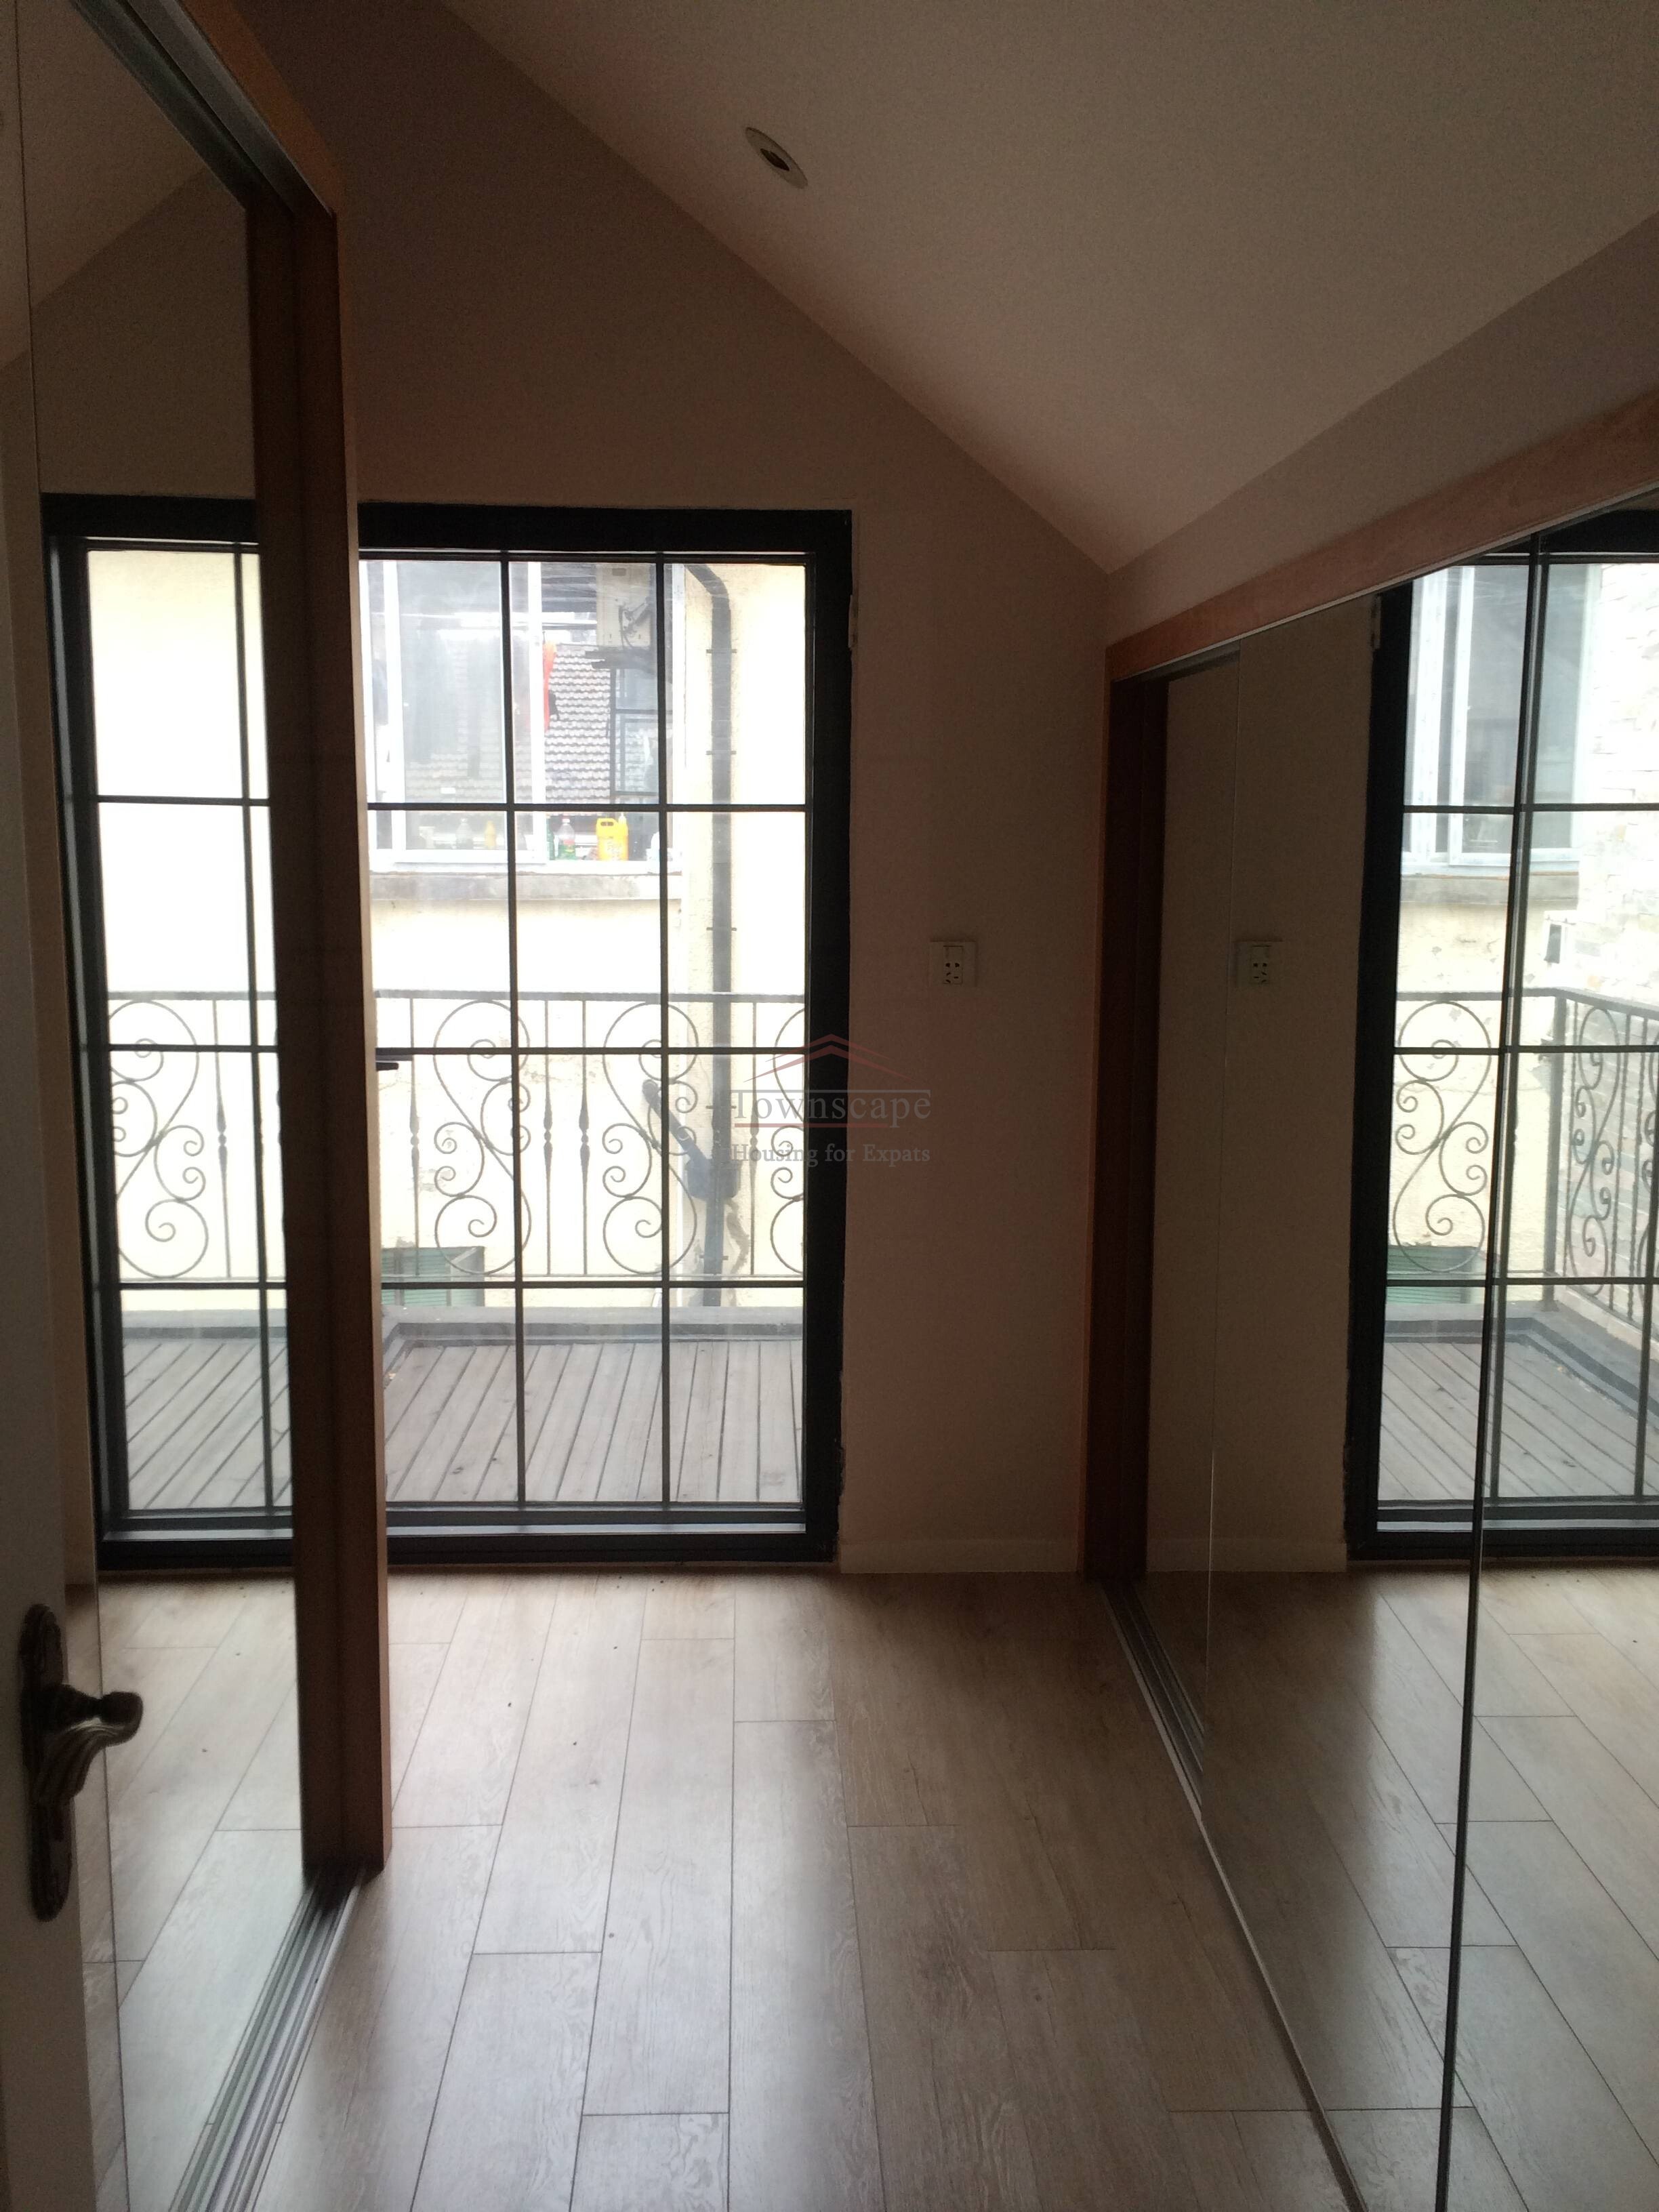 5 bedroom lane house shanghai 5 br newly renovated lane house in French Concession